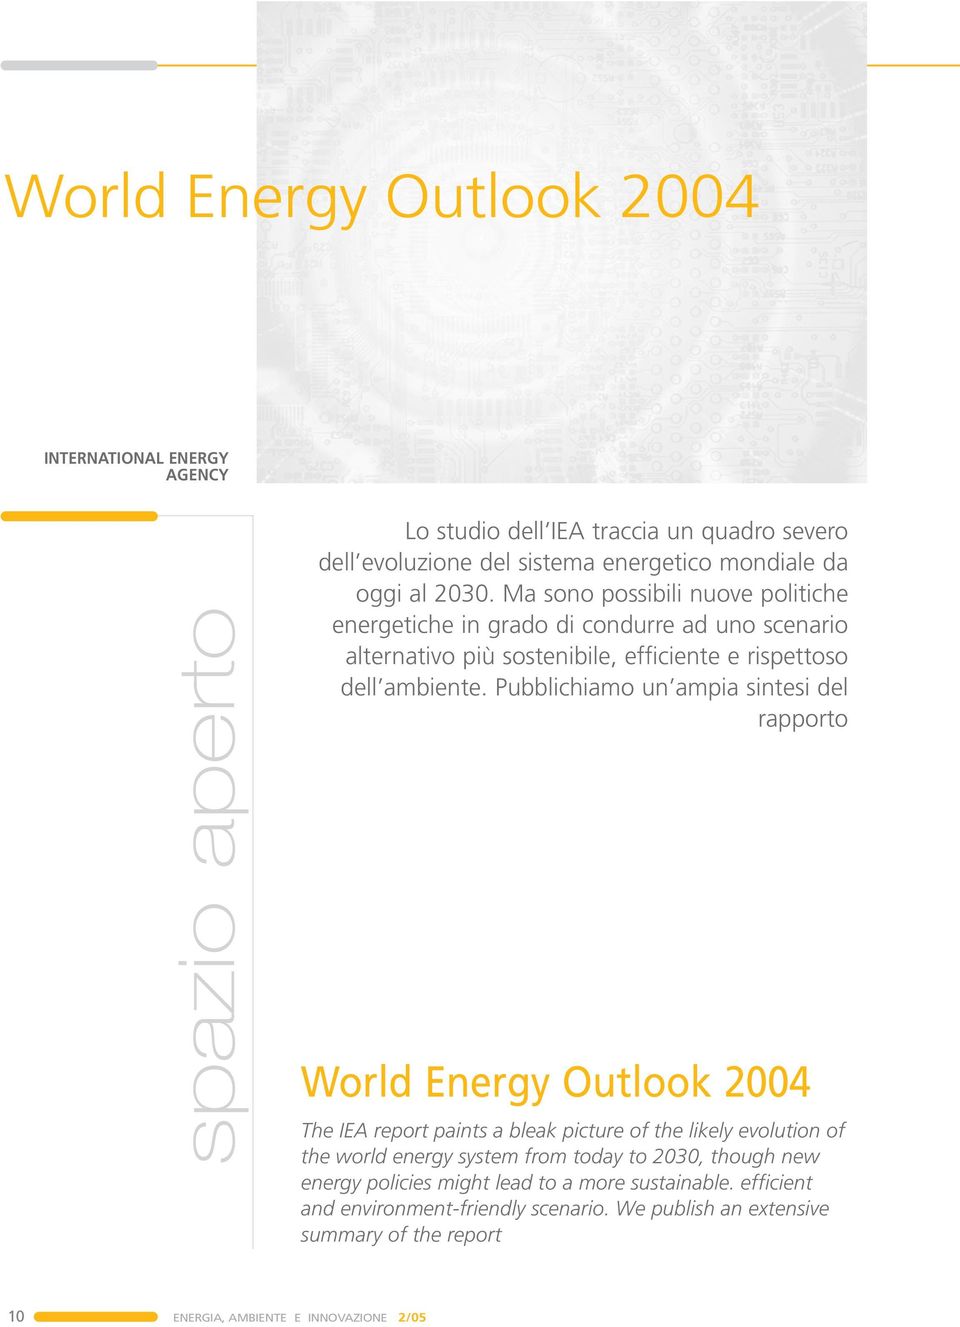 Pubblichiamo un ampia sintesi del rapporto World Energy Outlook 2004 The IEA report paints a bleak picture of the likely evolution of the world energy system from today to